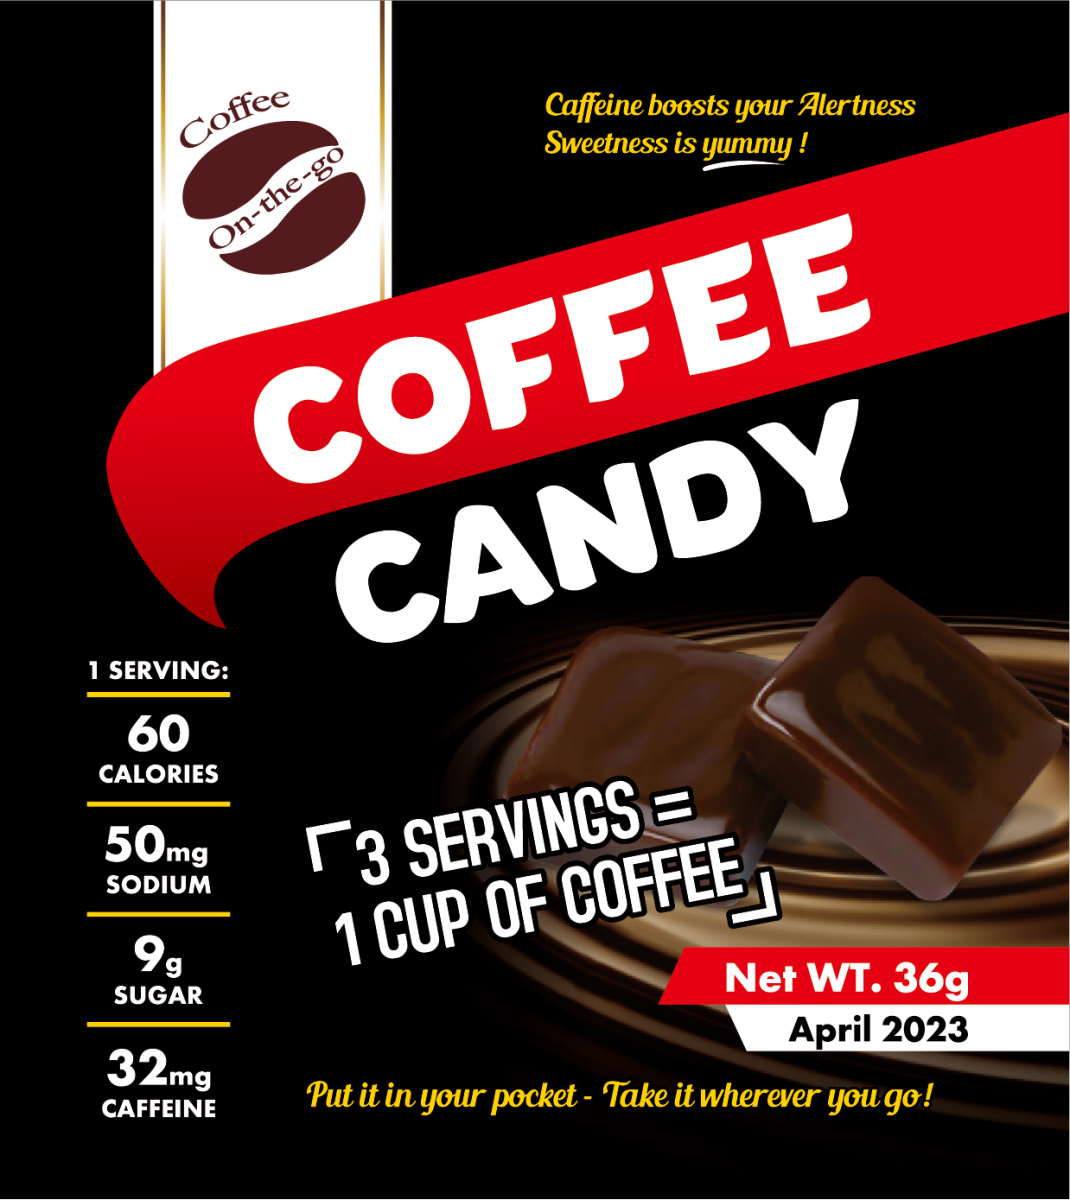 Students can win up to $500 in CoffeeCandy Raffle 